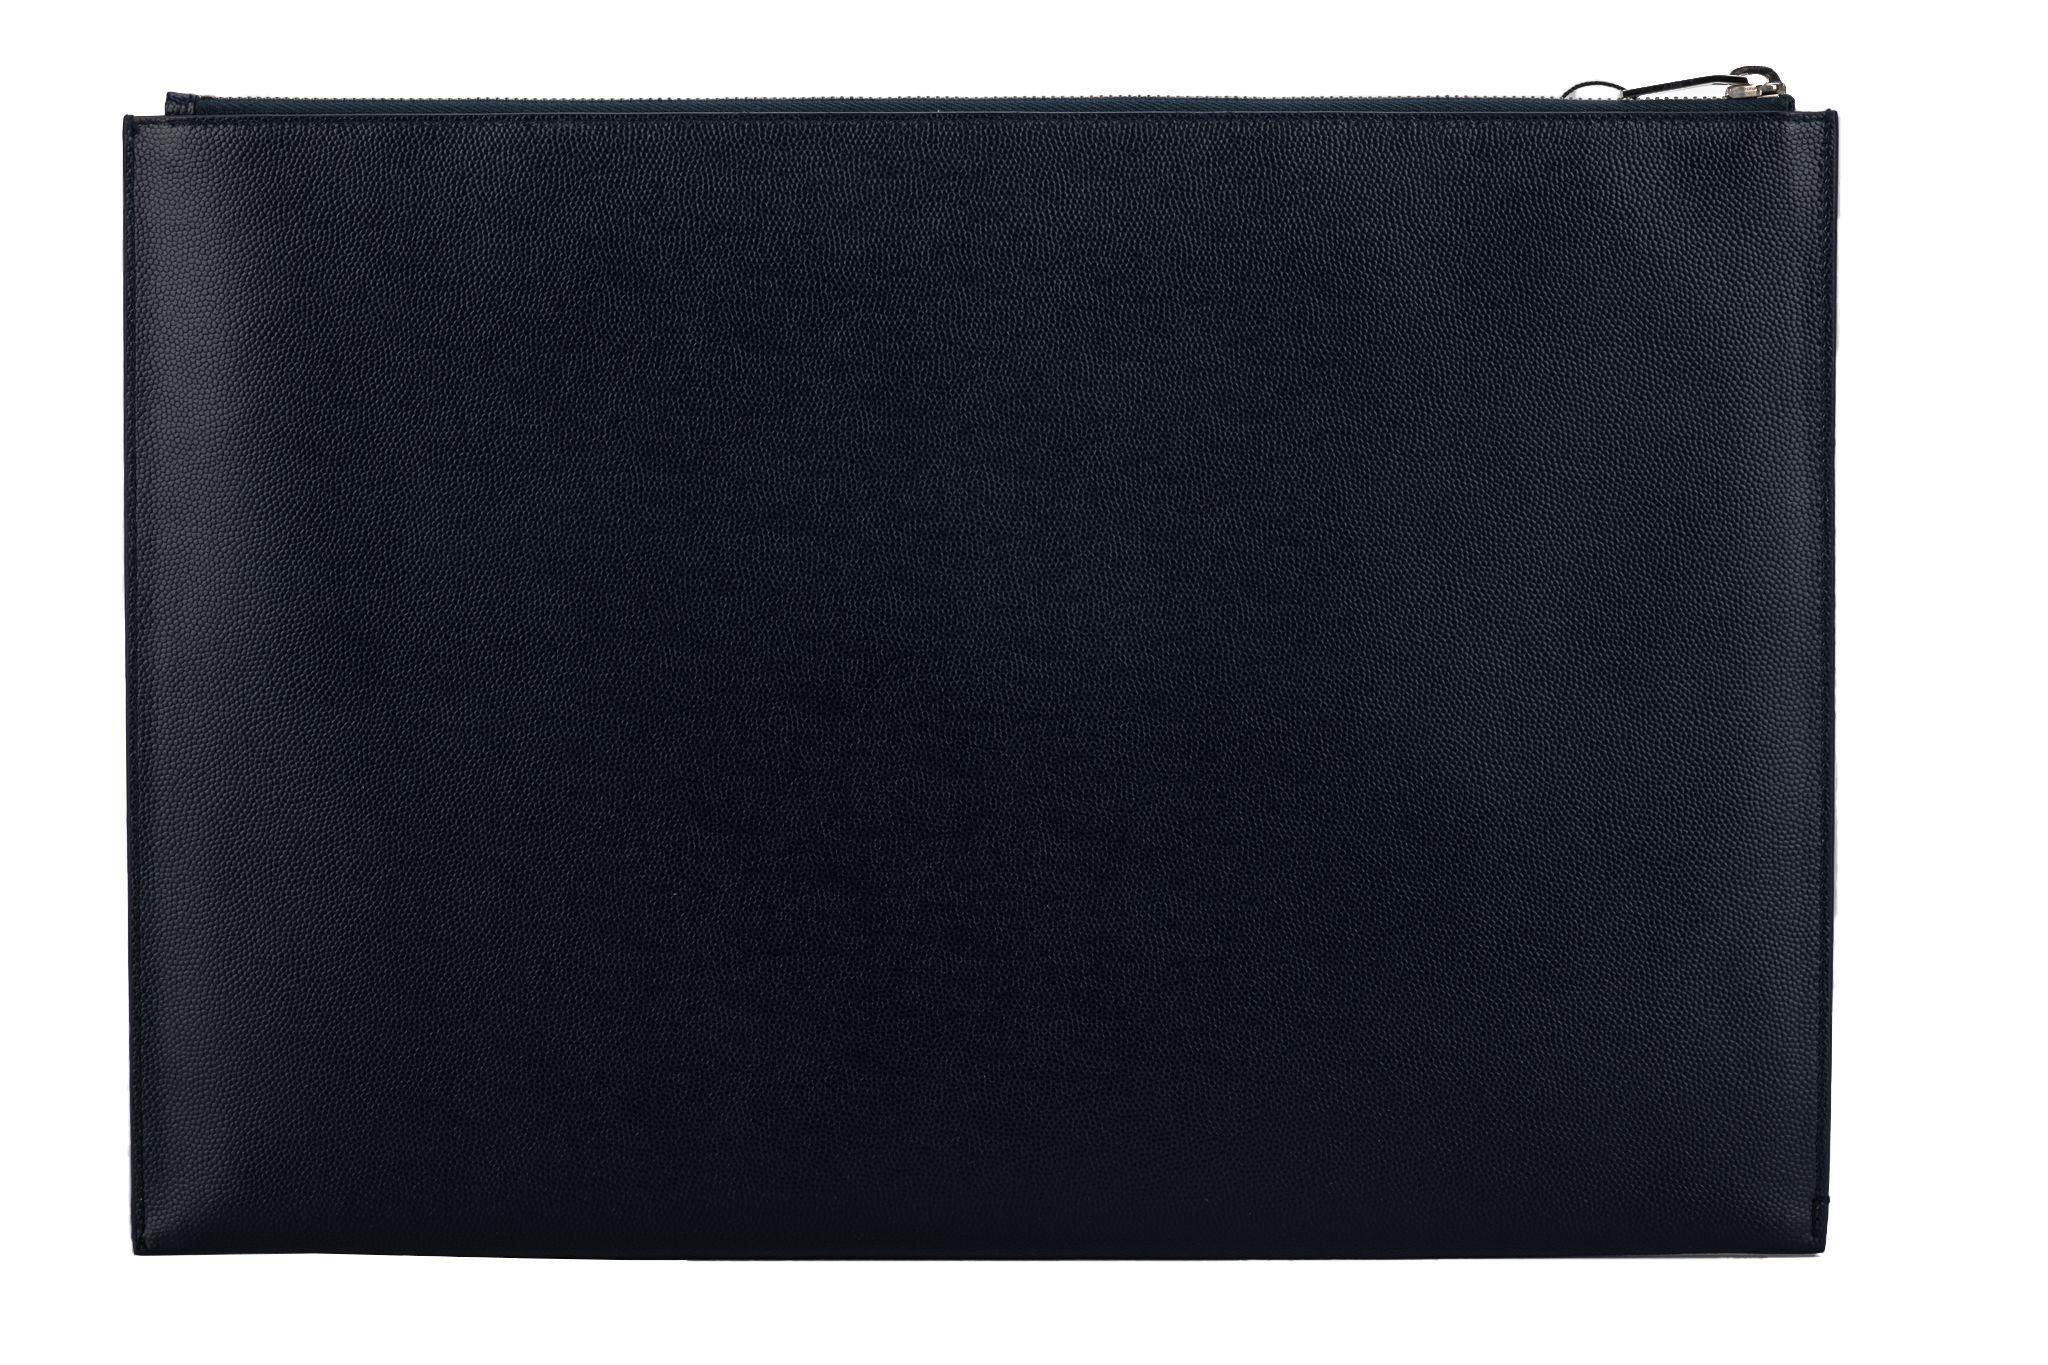 YSL navy blue pebbled leather oversize clutch. Pebbled leather and silver tone hardware. Original dust cover.